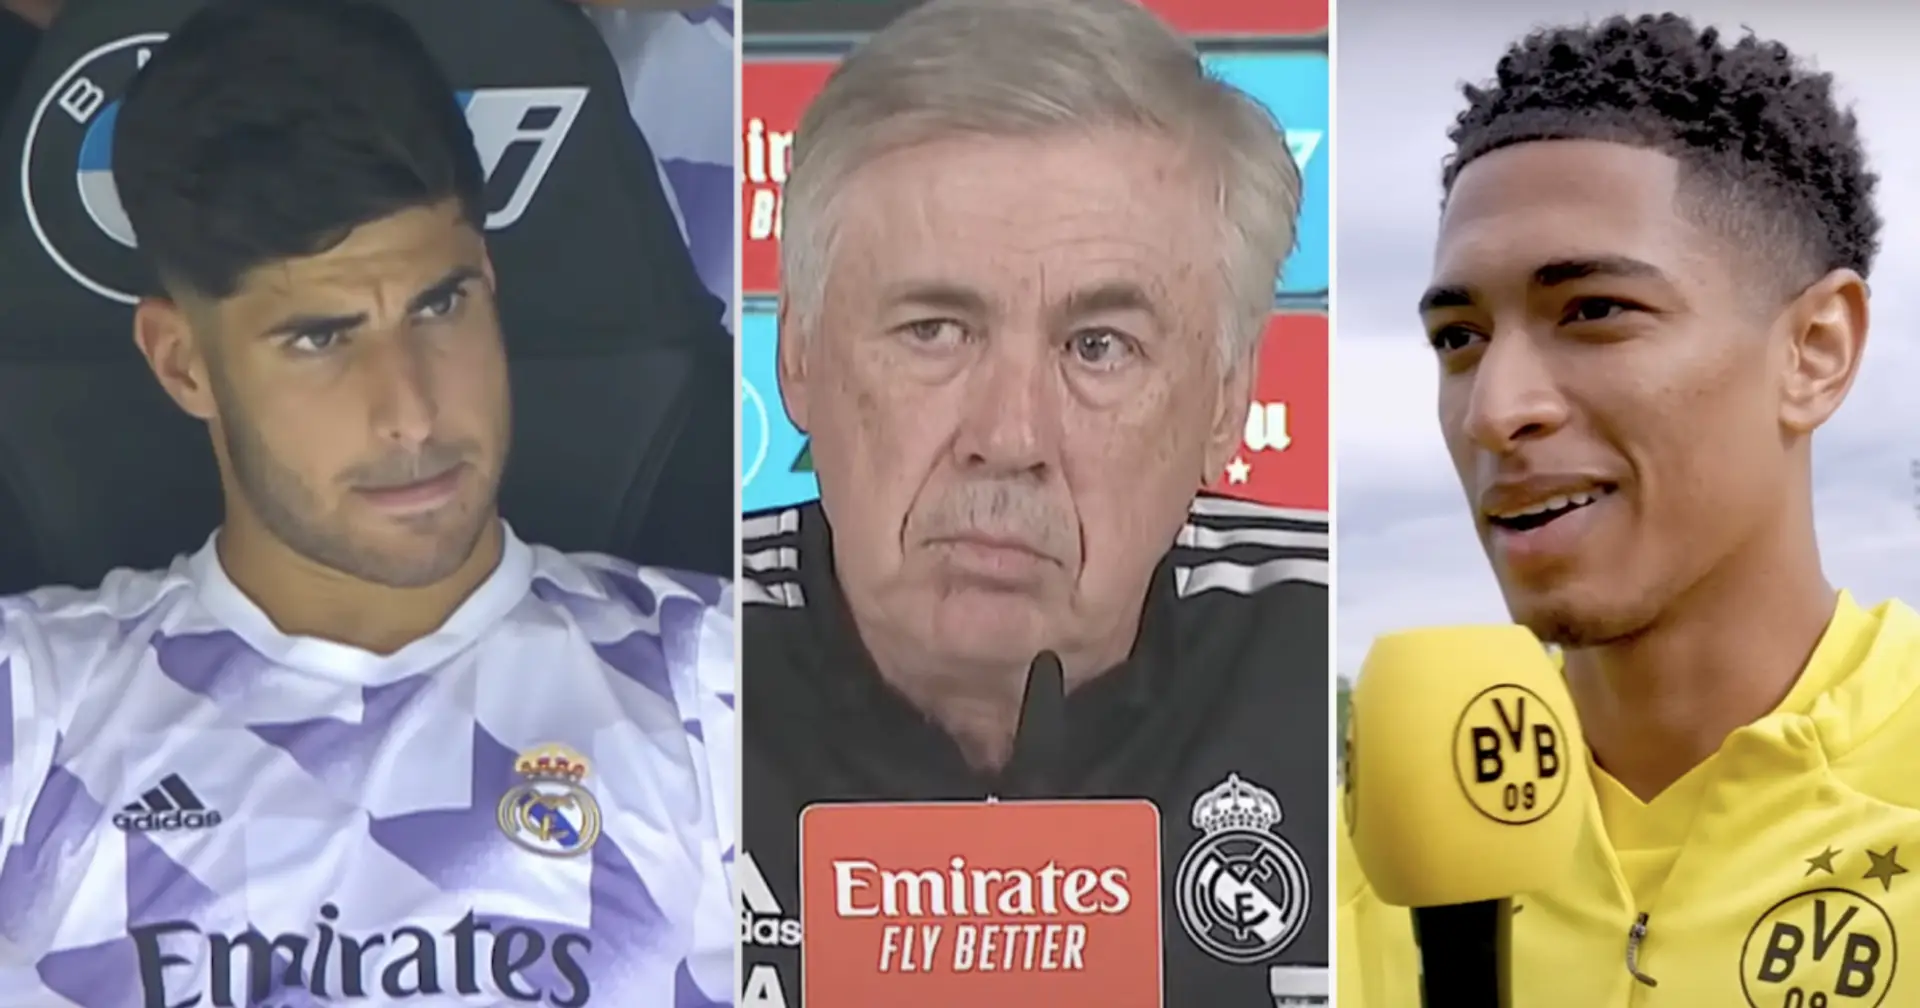 Candidates to replace Asensio named and 2 more big stories you could've missed